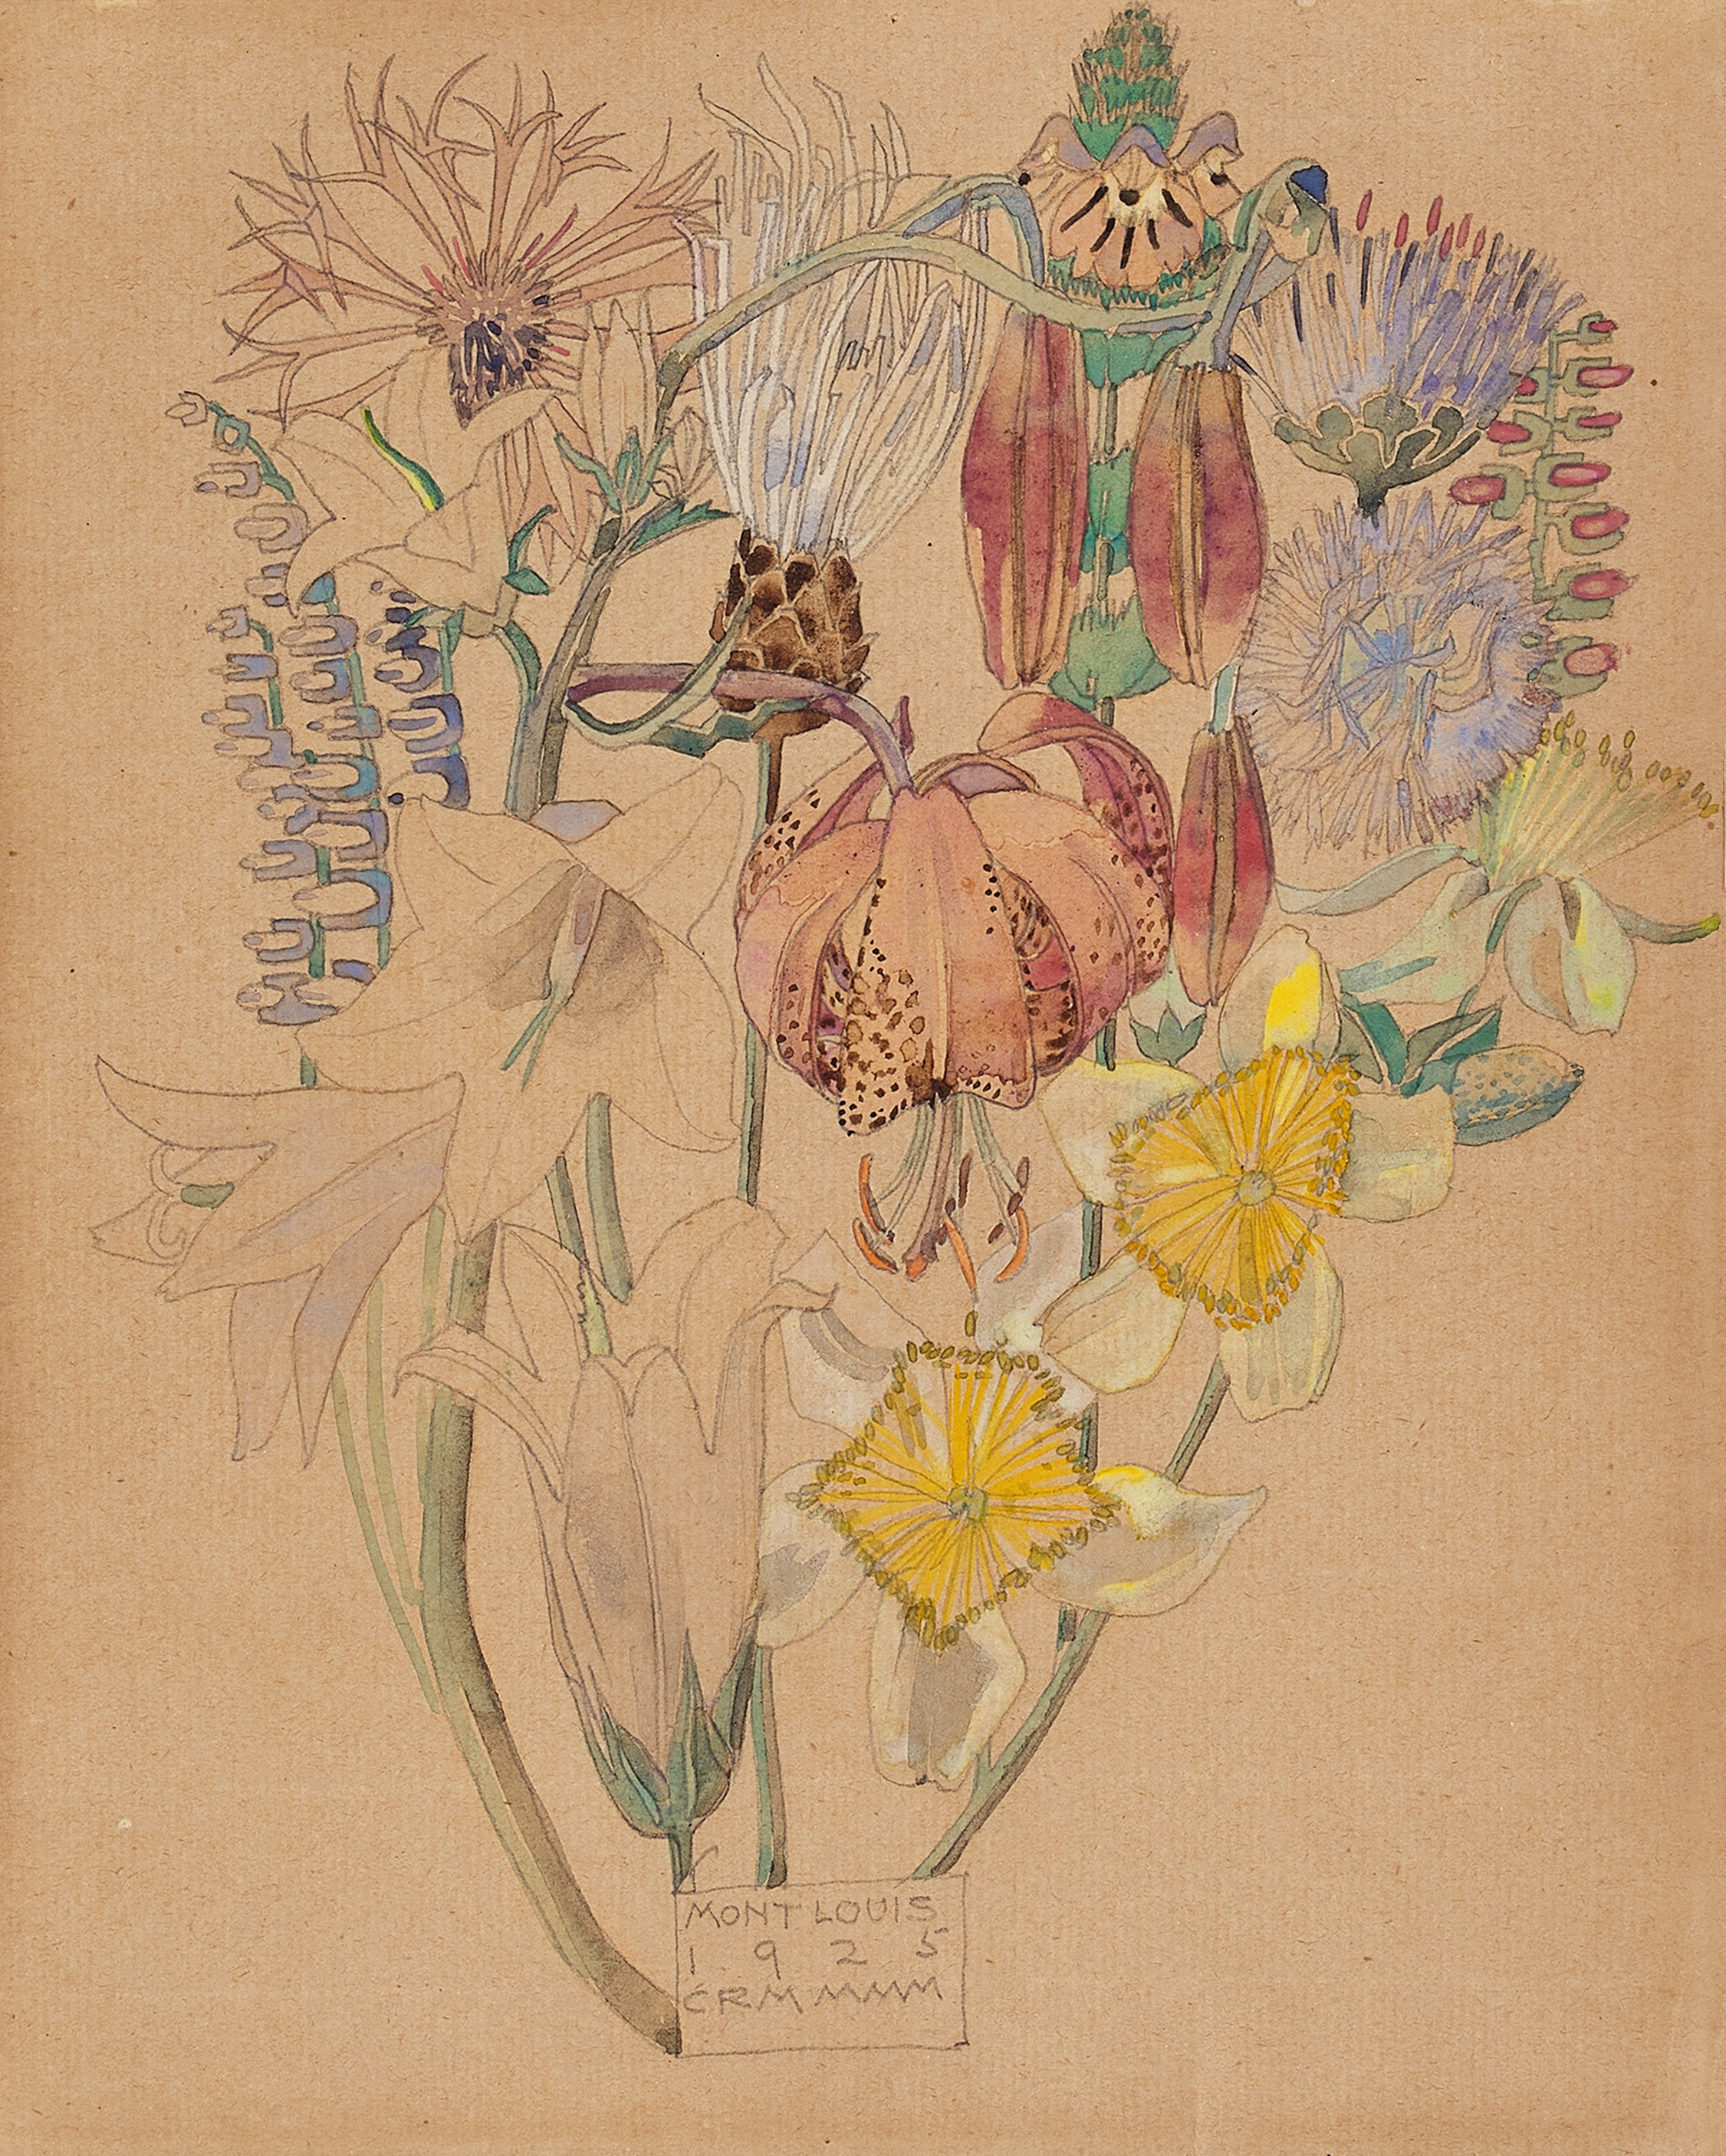 Artwork by Charles Rennie Mackintosh, Mont Louis - Flower Study, Made of pencil and watercolor on paper